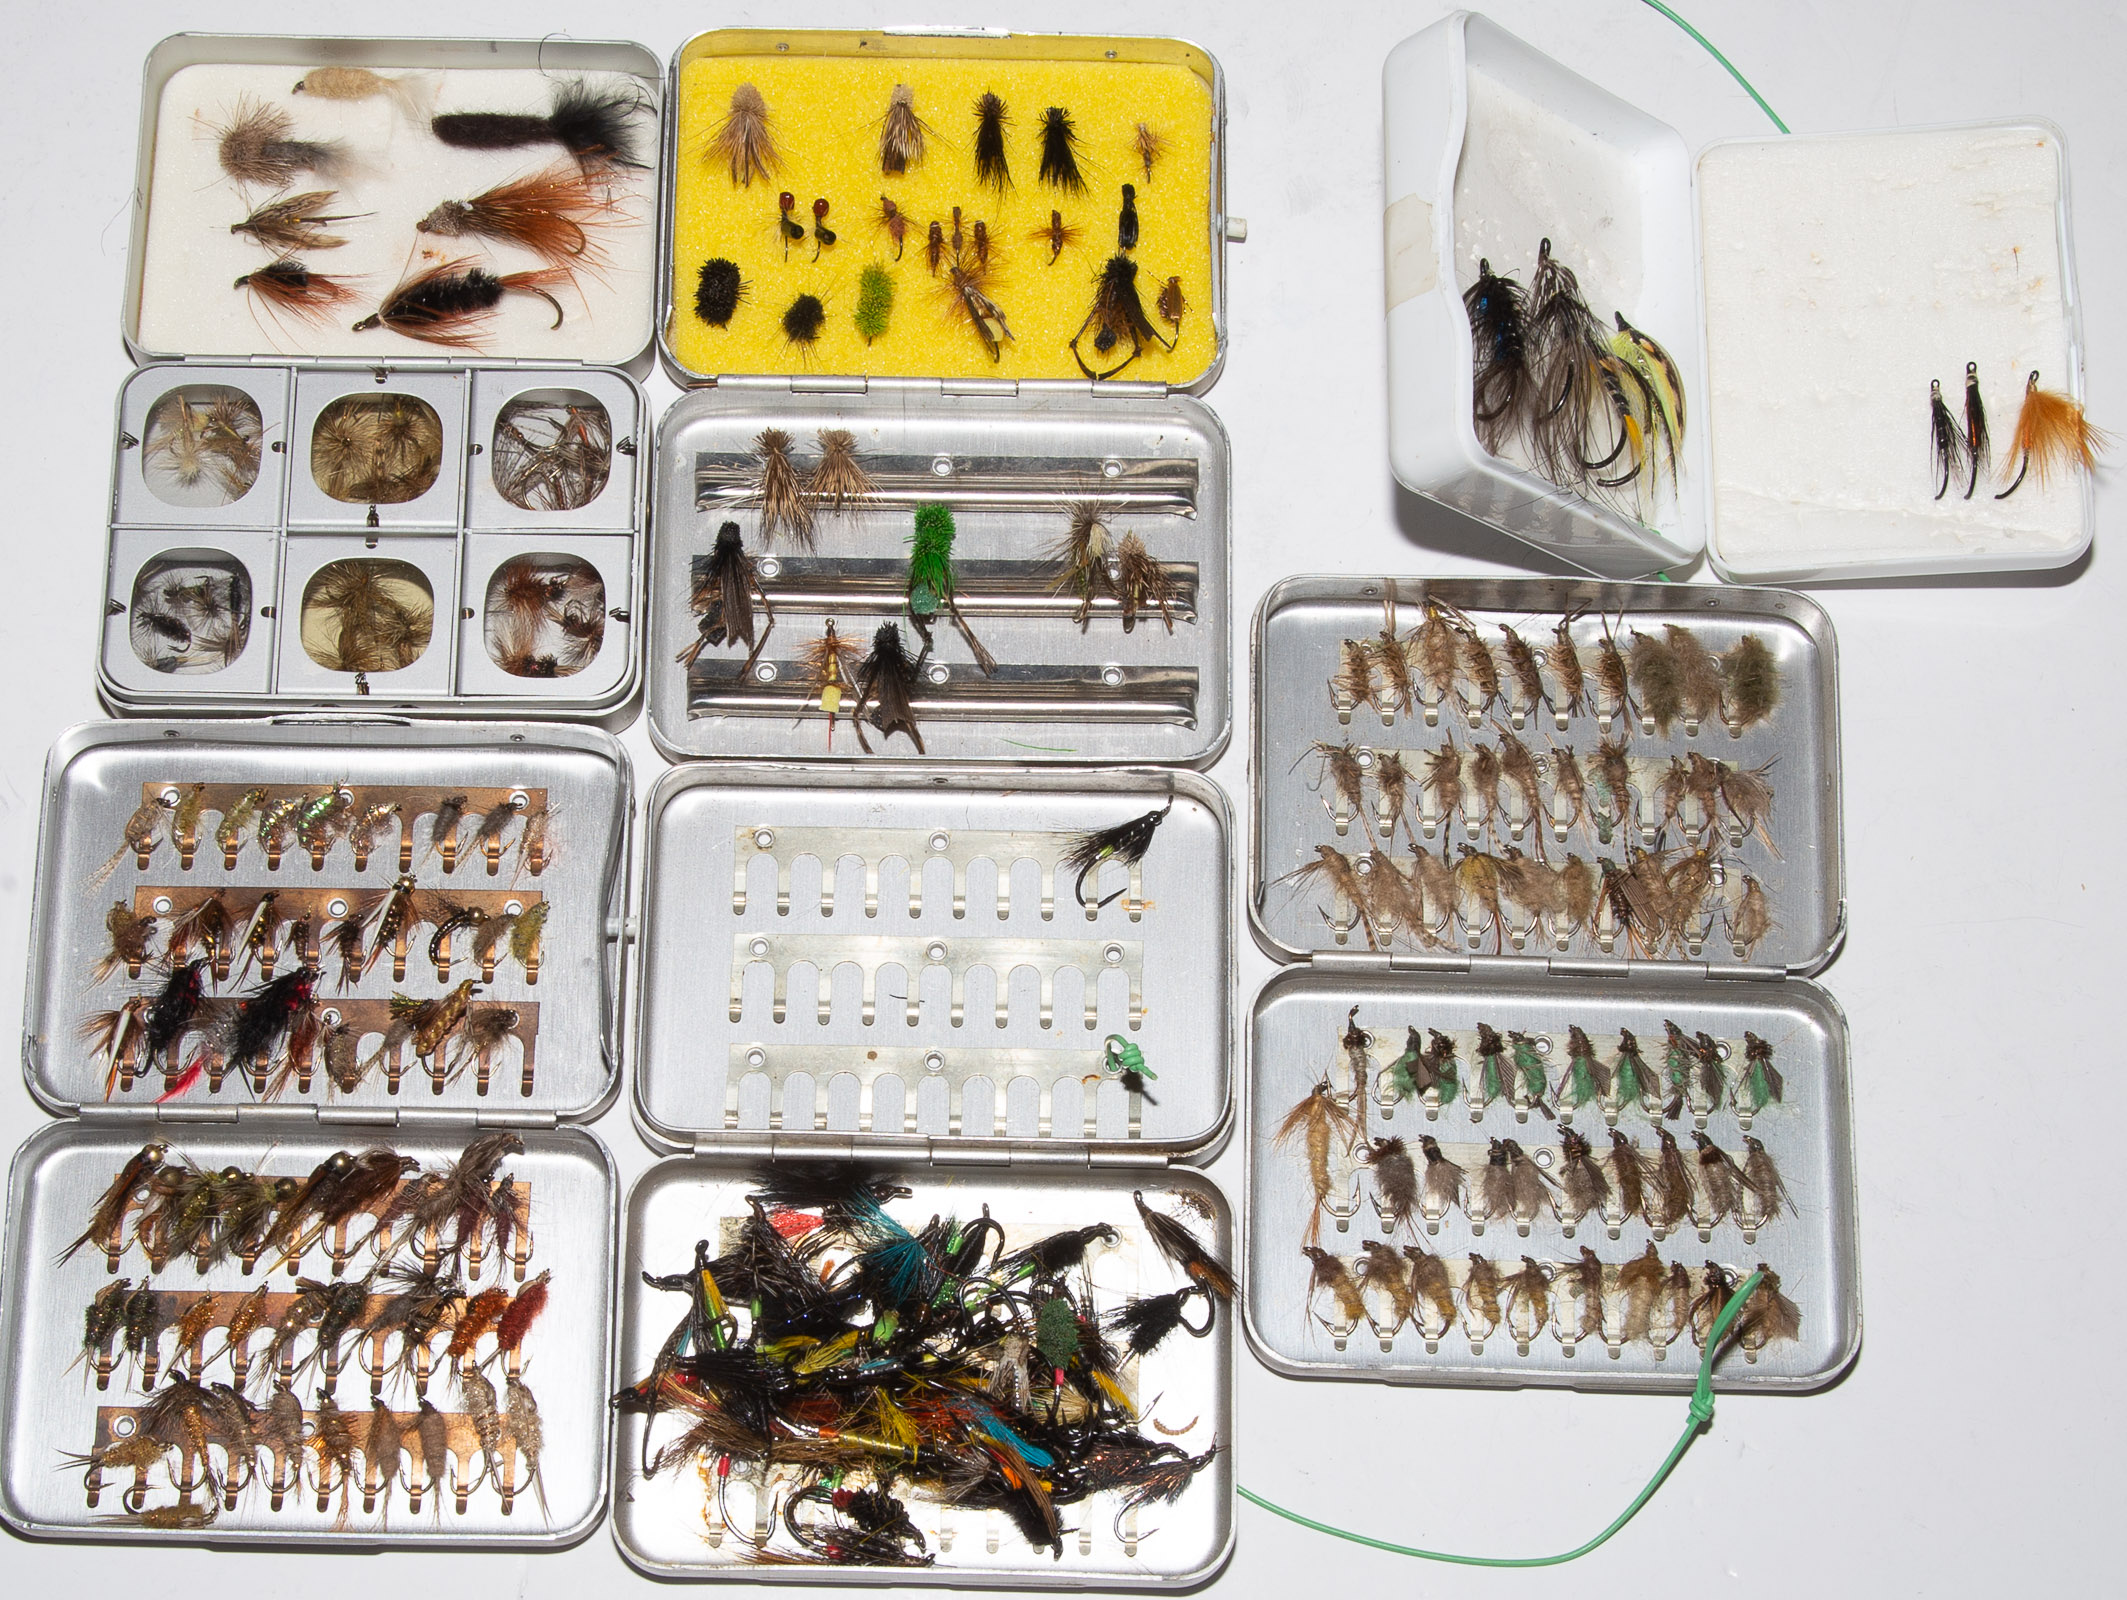 SIX BOXES OF HANDMADE FLY FISHING